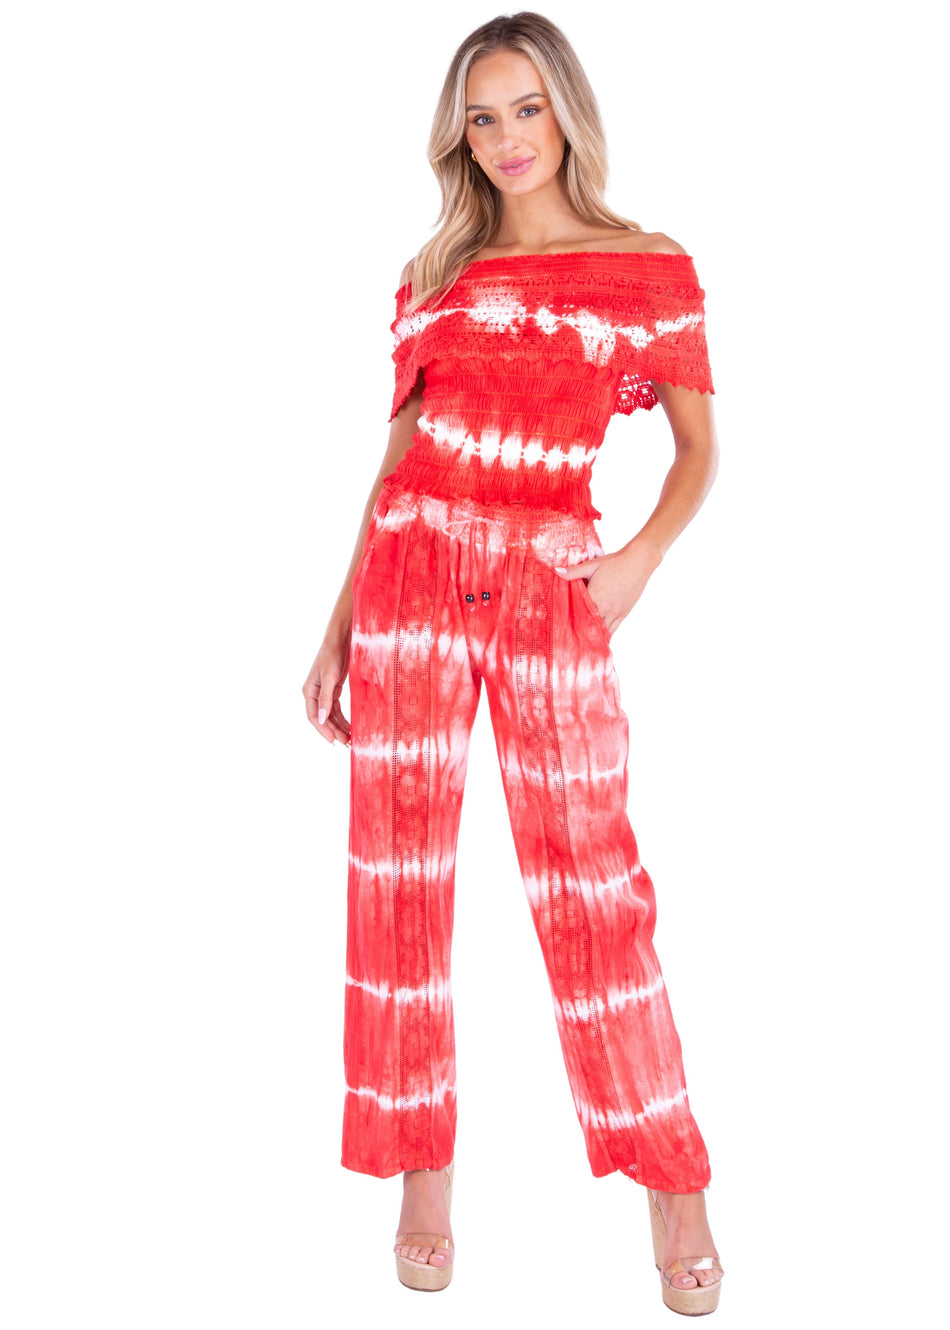 NW1163 - Tie Dye Red Cotton Top